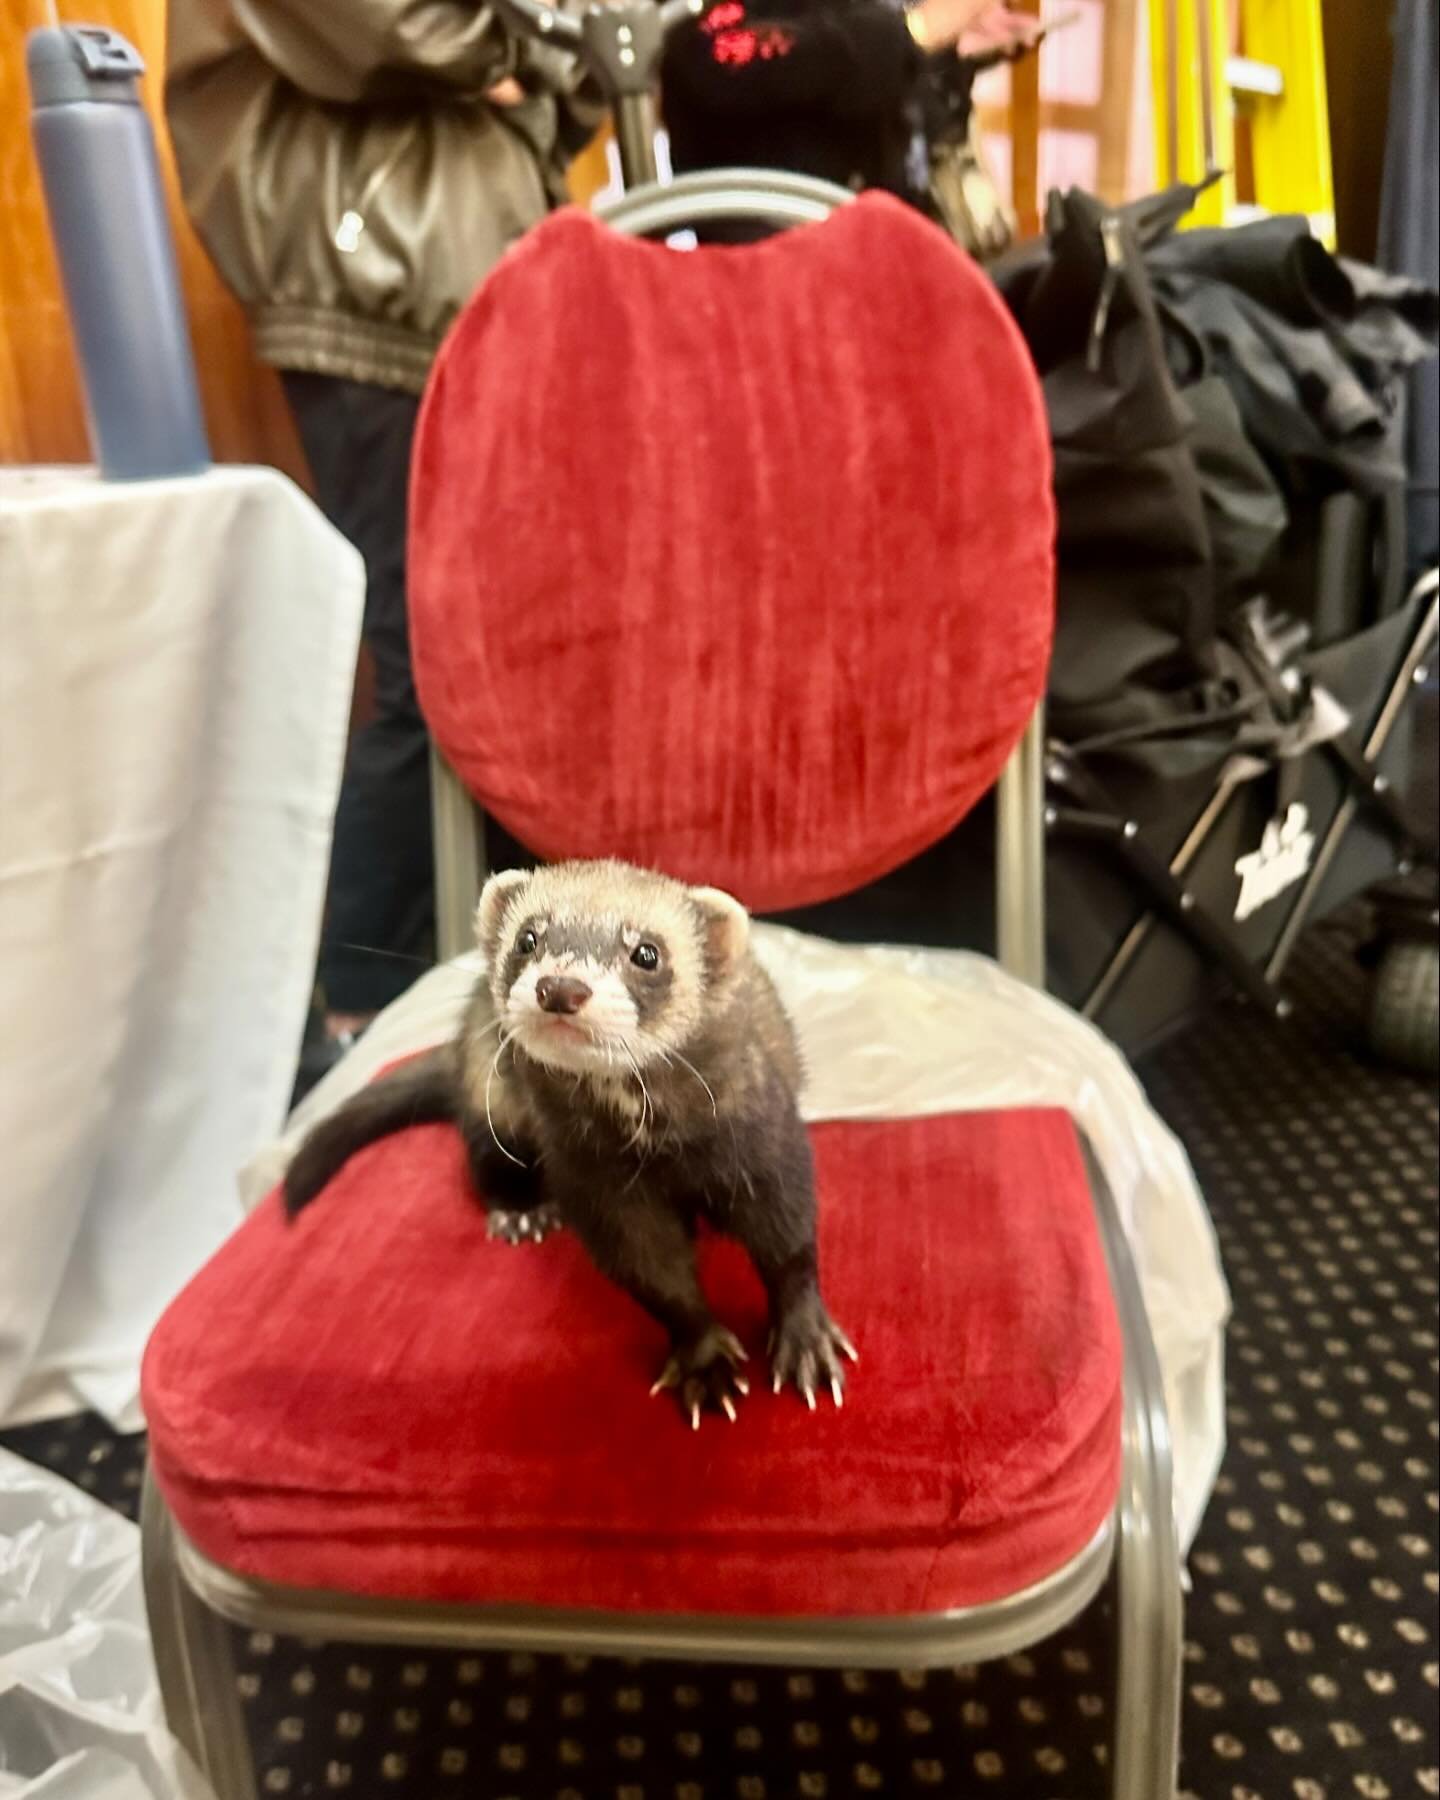 Munchie&rsquo;s first day on set and he&rsquo;s smashed it! 

#ferret #ferretgram #ferretlover #onset #commercial #tvc #advertising #advertisement #producer #production #productioncompany #filmcrewuk #filmcrew